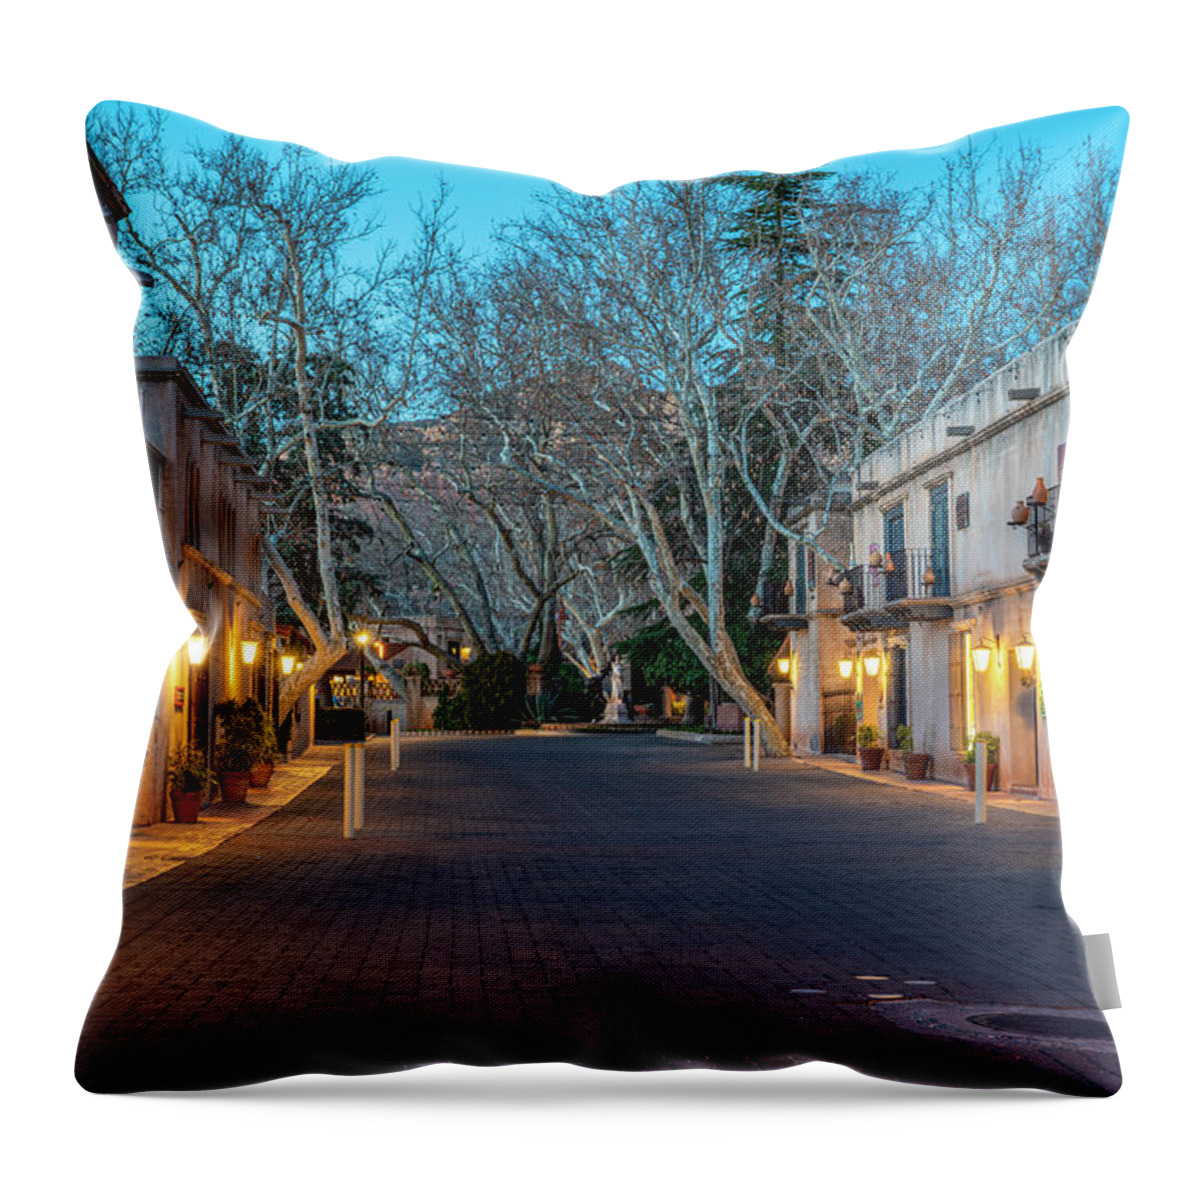 Tlaquepaque Throw Pillow featuring the photograph Tlaquepaque Street at Dusk by Al Judge